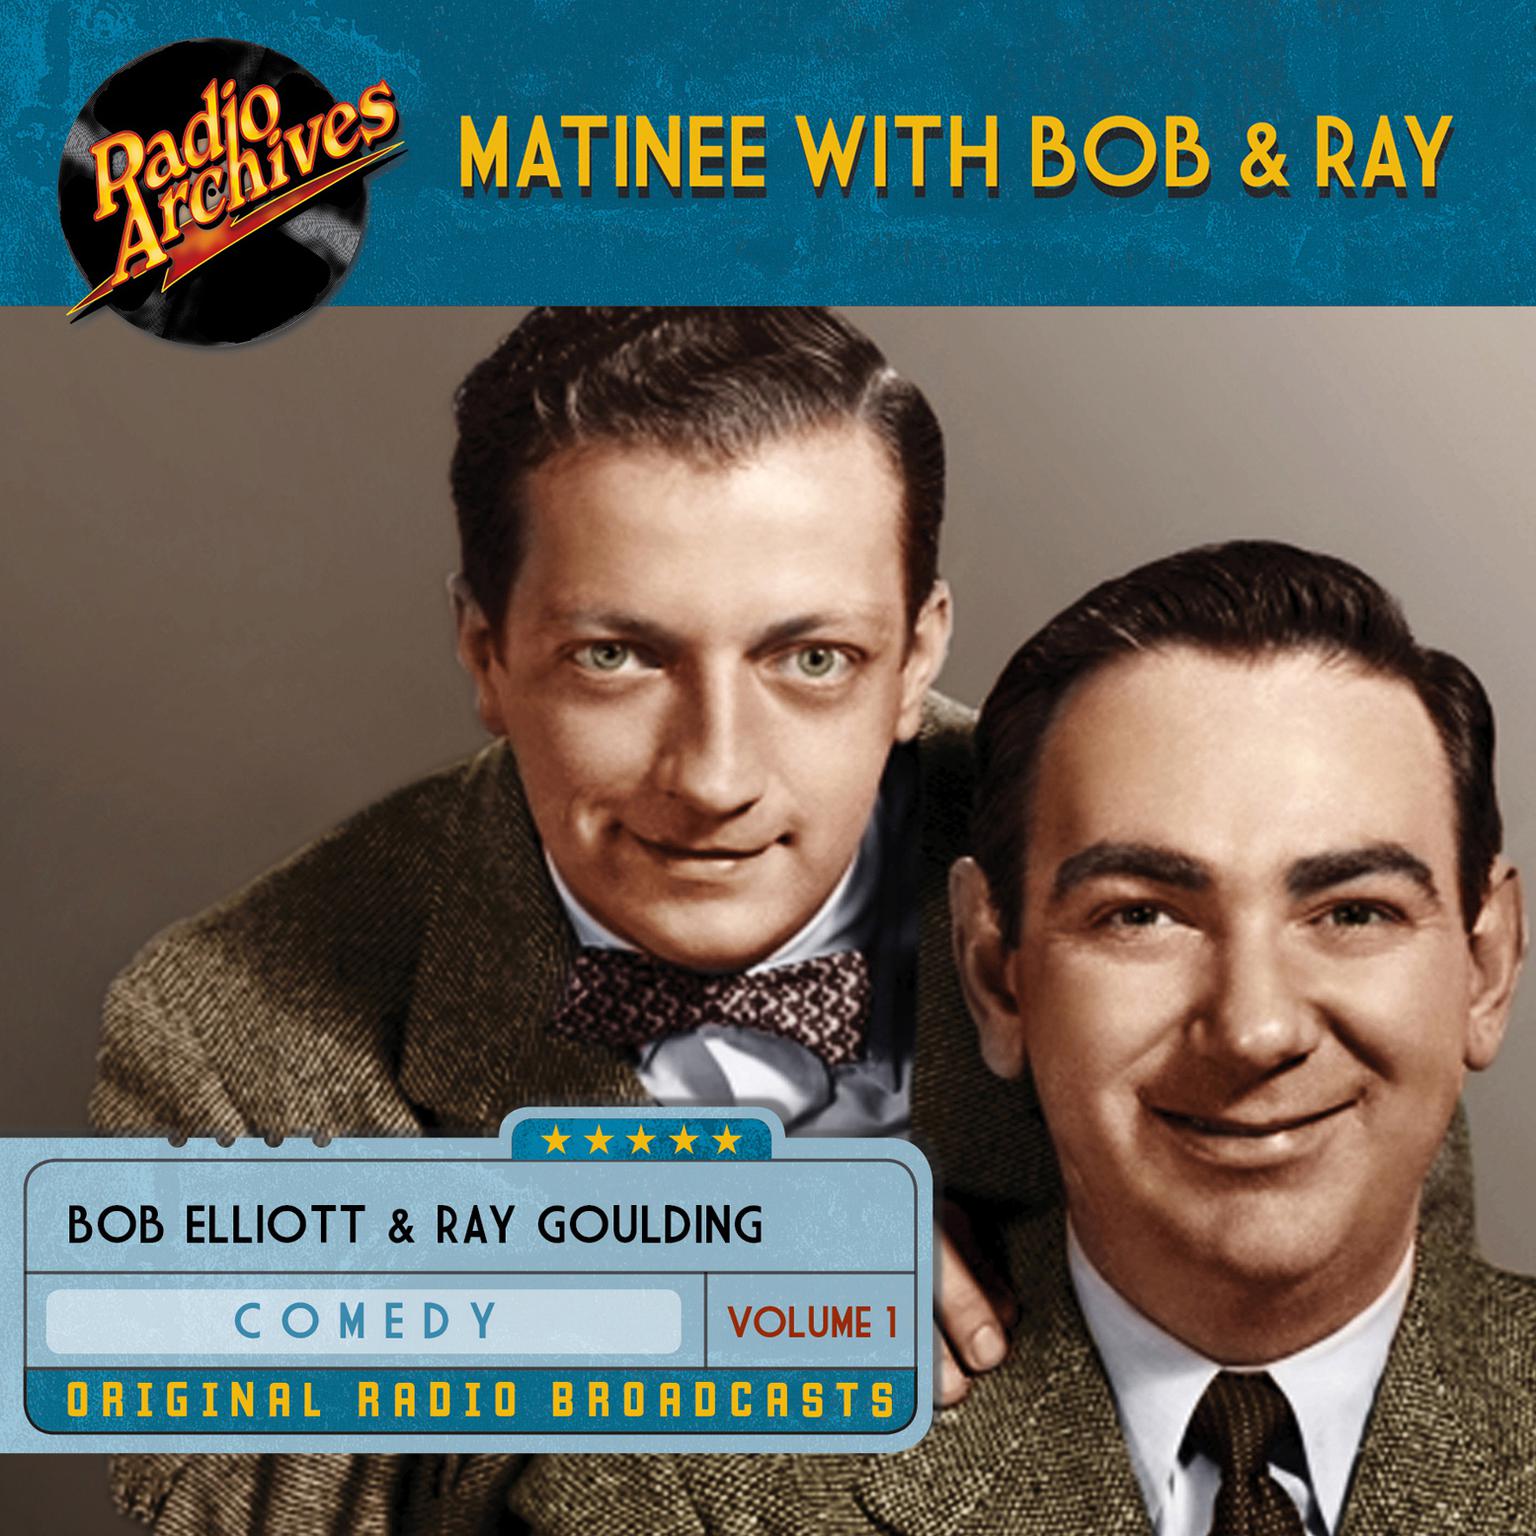 Matinee with Bob & Ray, Volume 1 Audiobook, by various authors